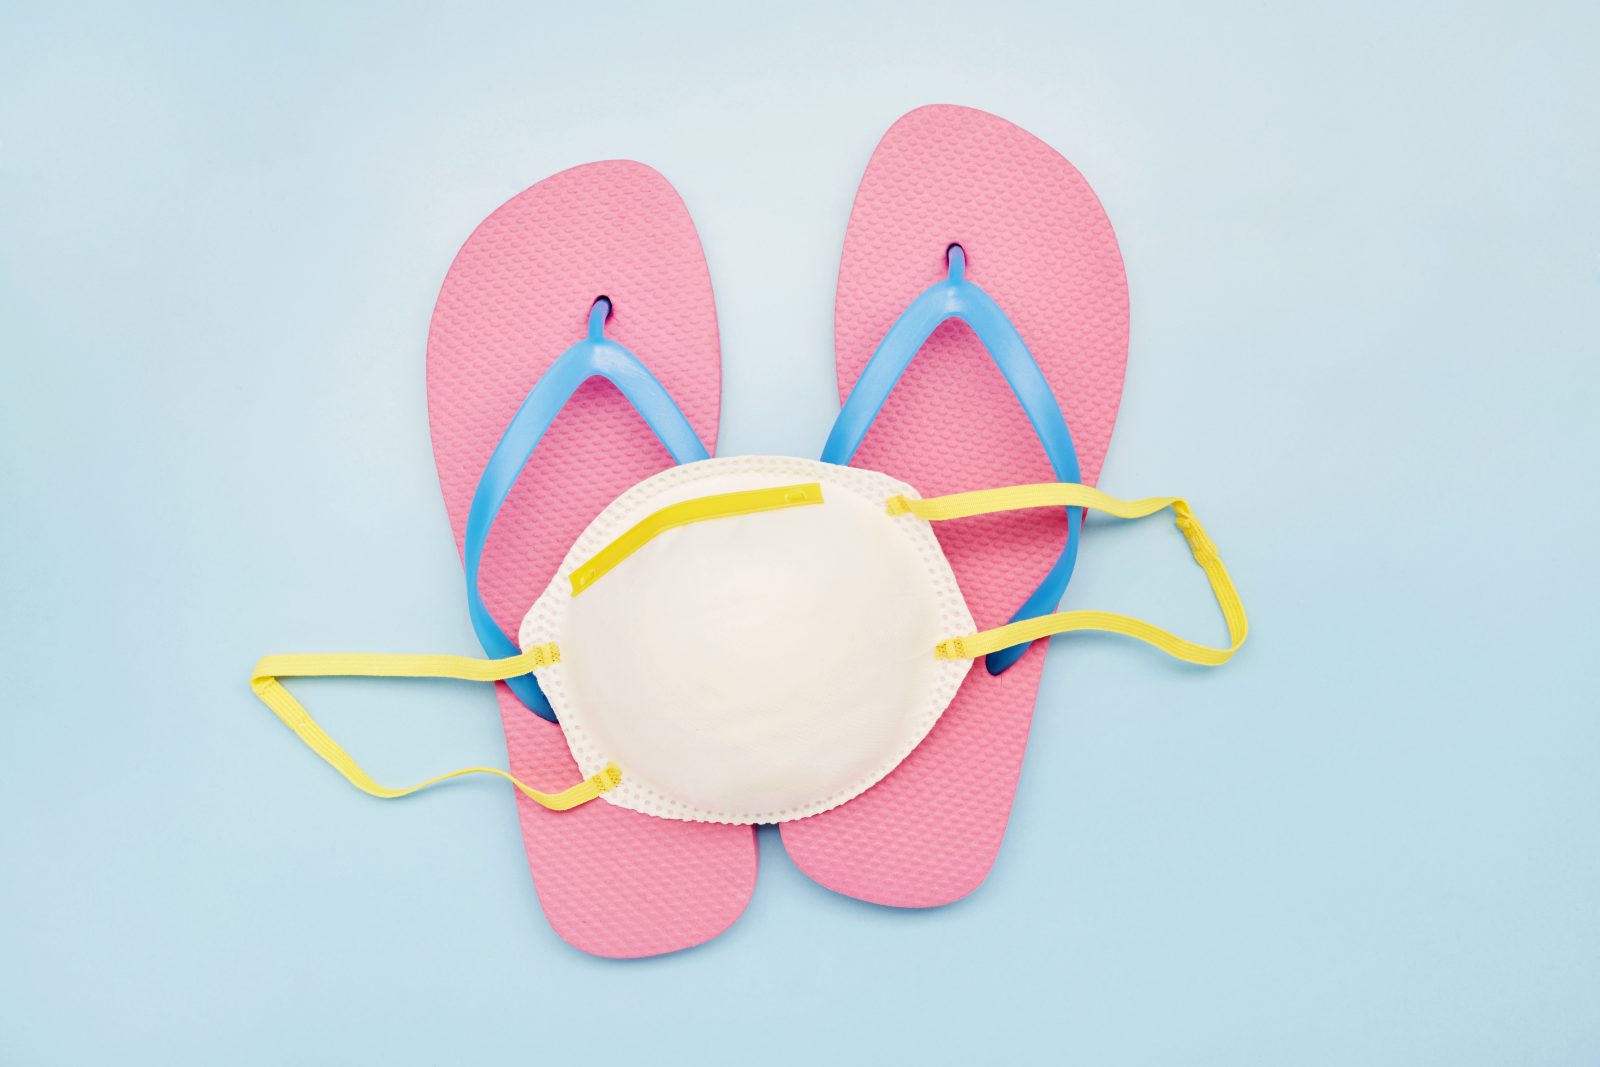 Still life of a white face mask and pink flip-flops on blue background, on vacation with a face mask